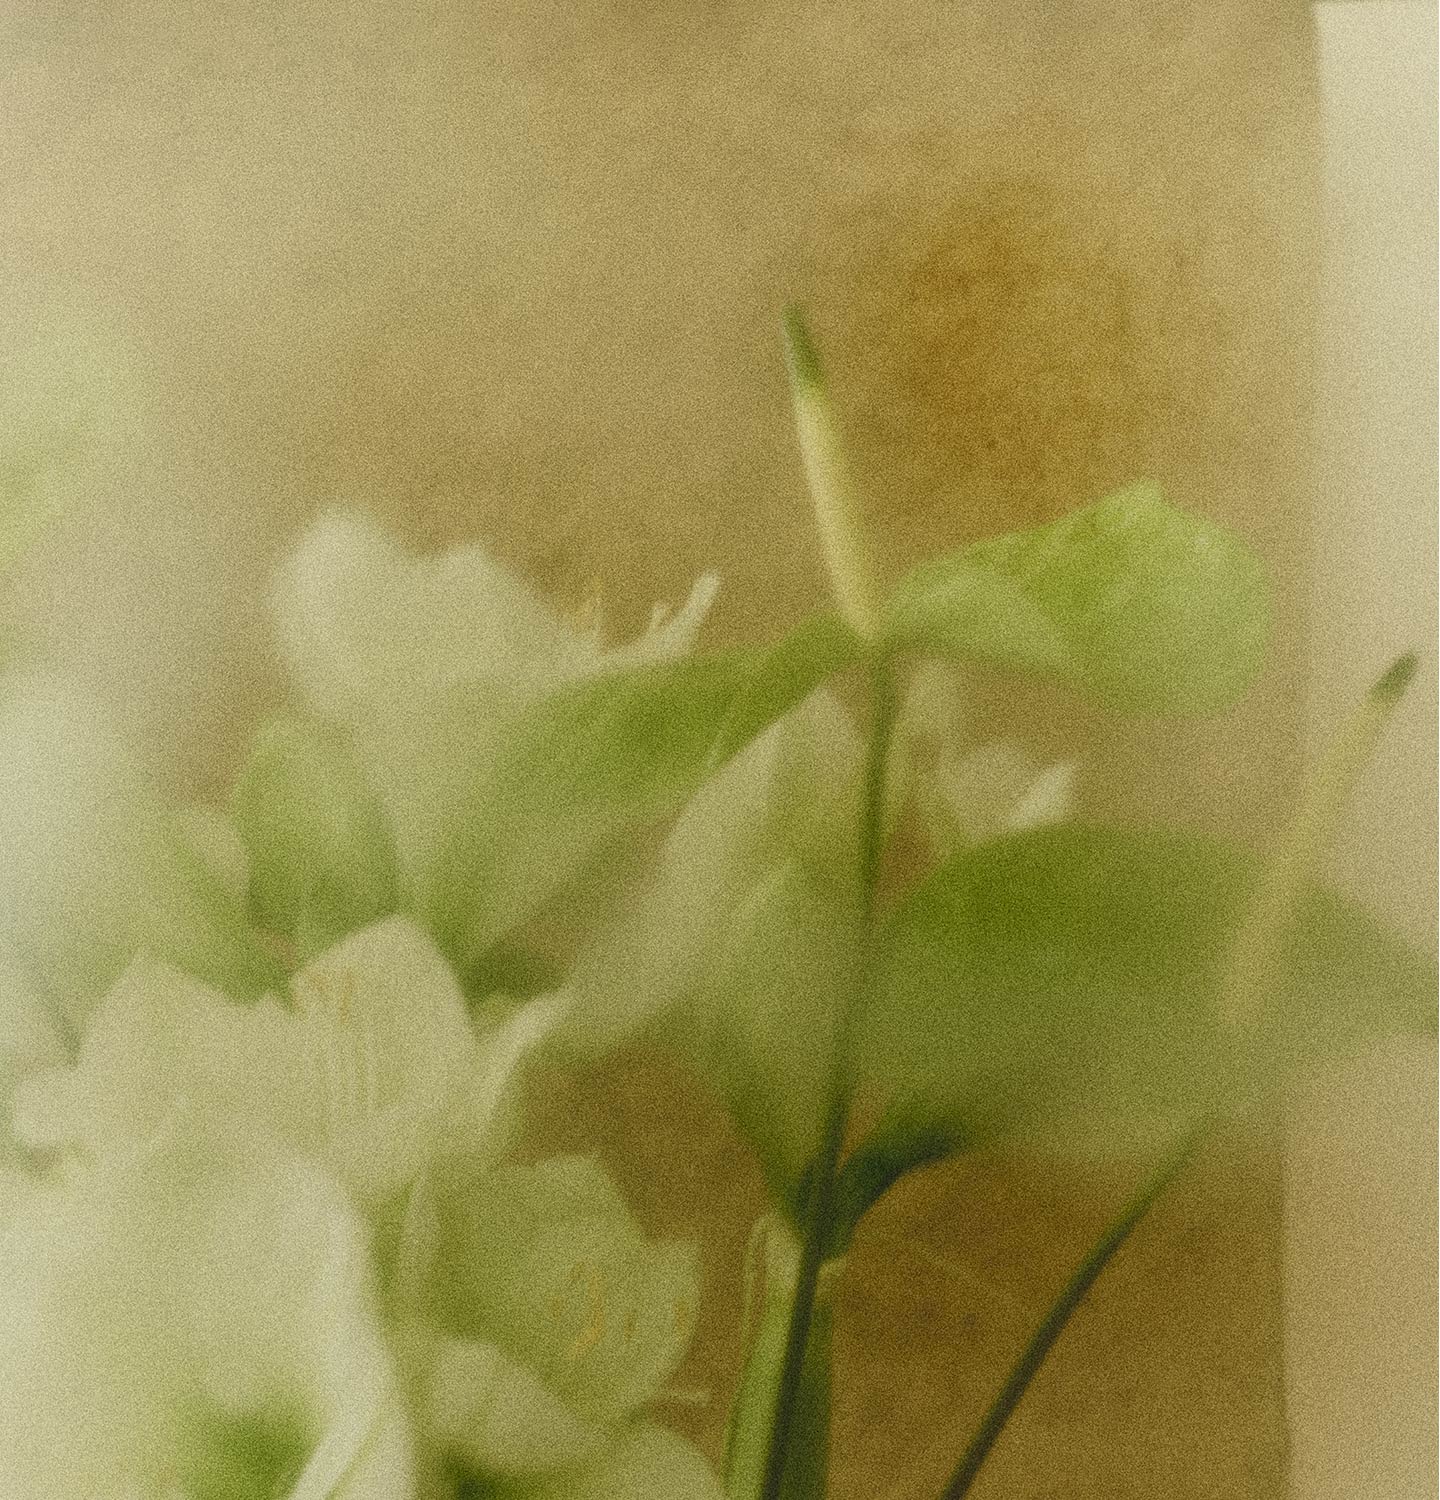 Green and white flowers in blur 